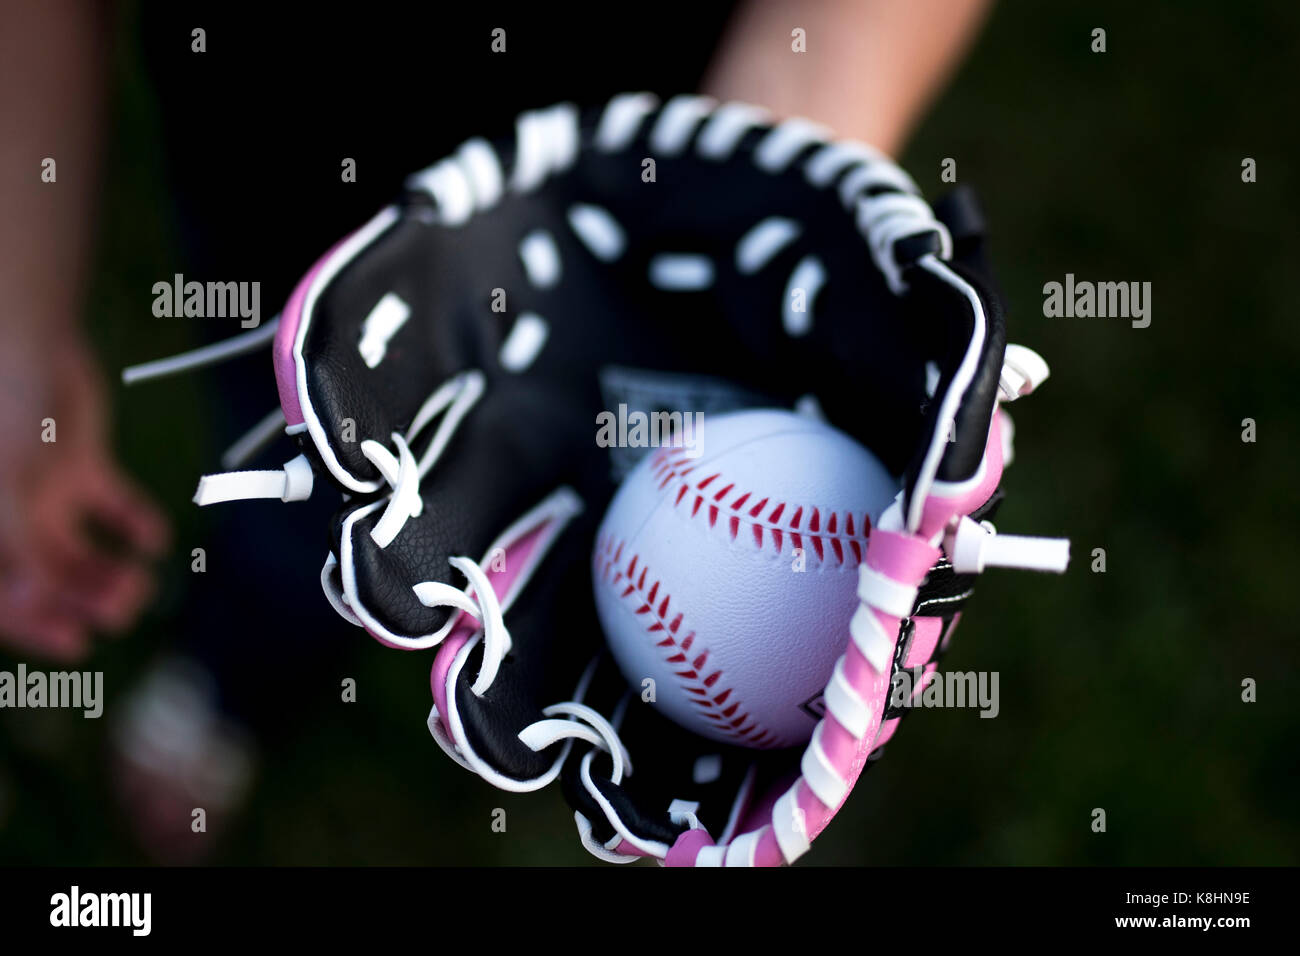 Cropped hand of girl wearing baseball glove with ball Stock Photo